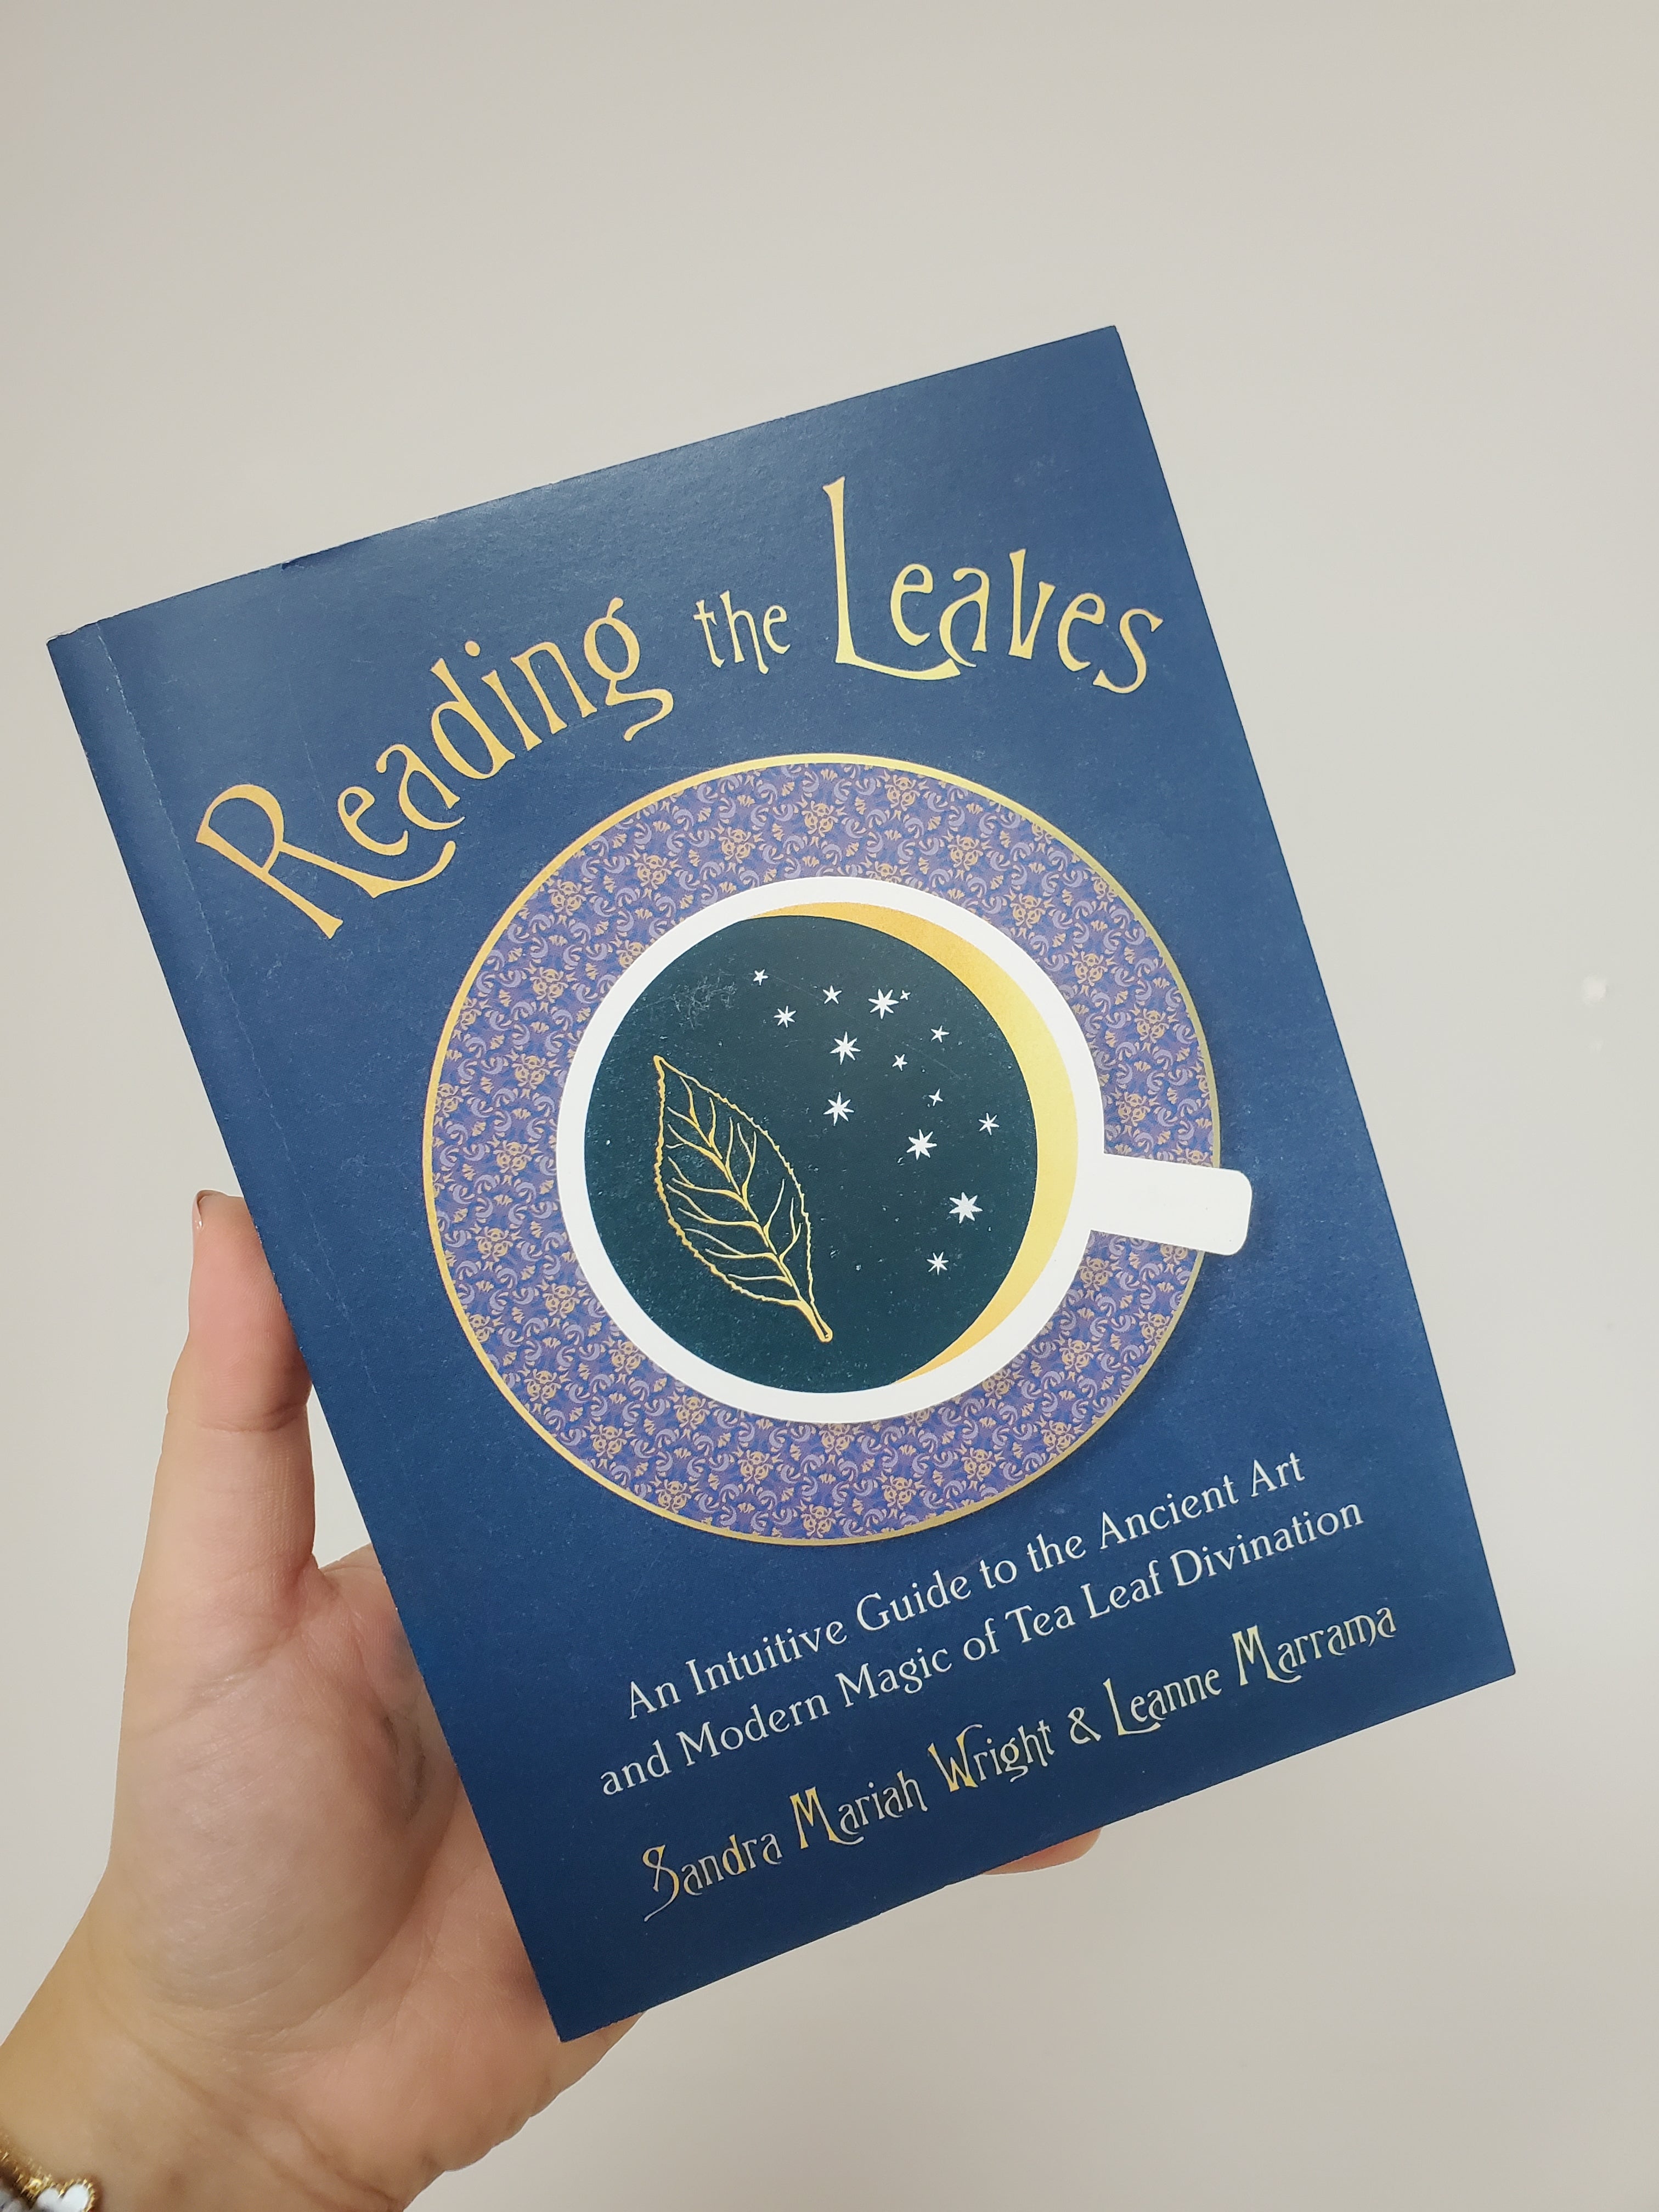 Reading the Leaves - An Intuitive Guide to the Ancient Art and Modern Magic of Tea Leaf Divination